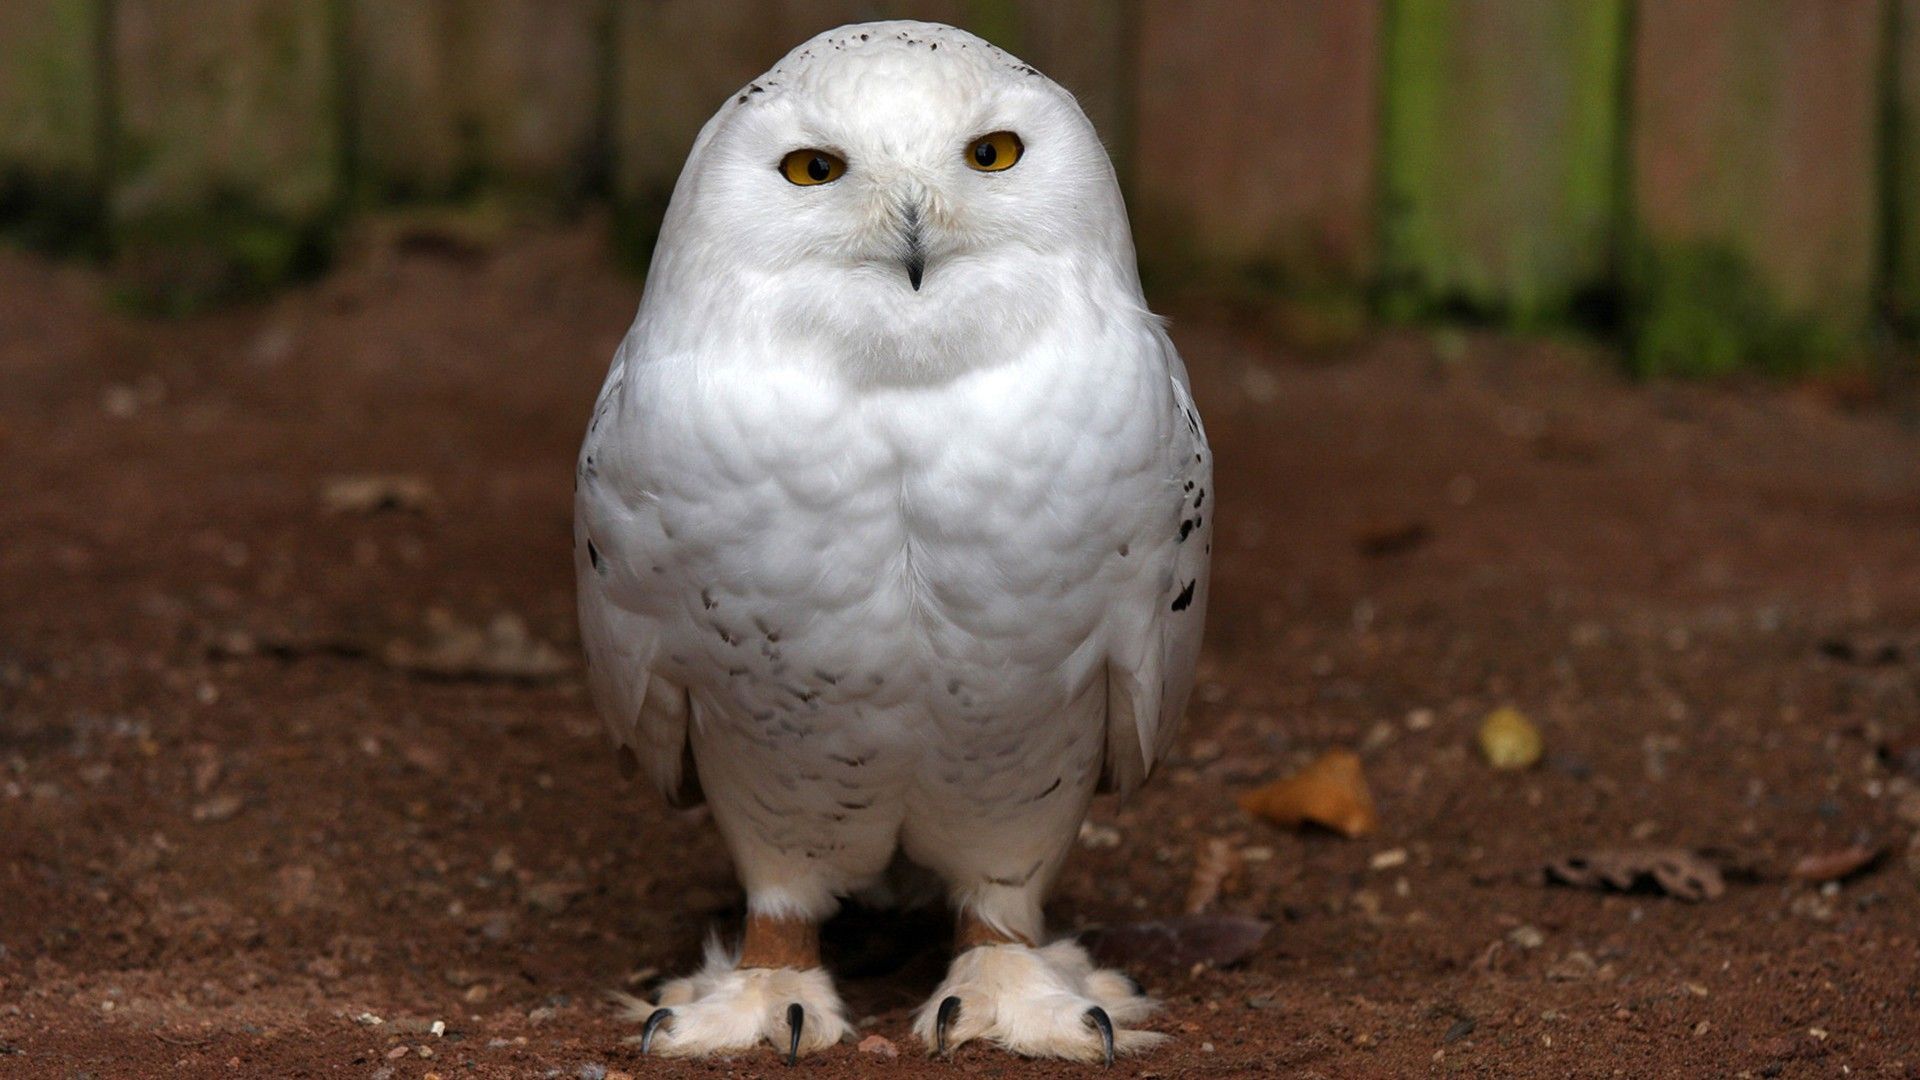 White Owl Wallpaper Iphone images